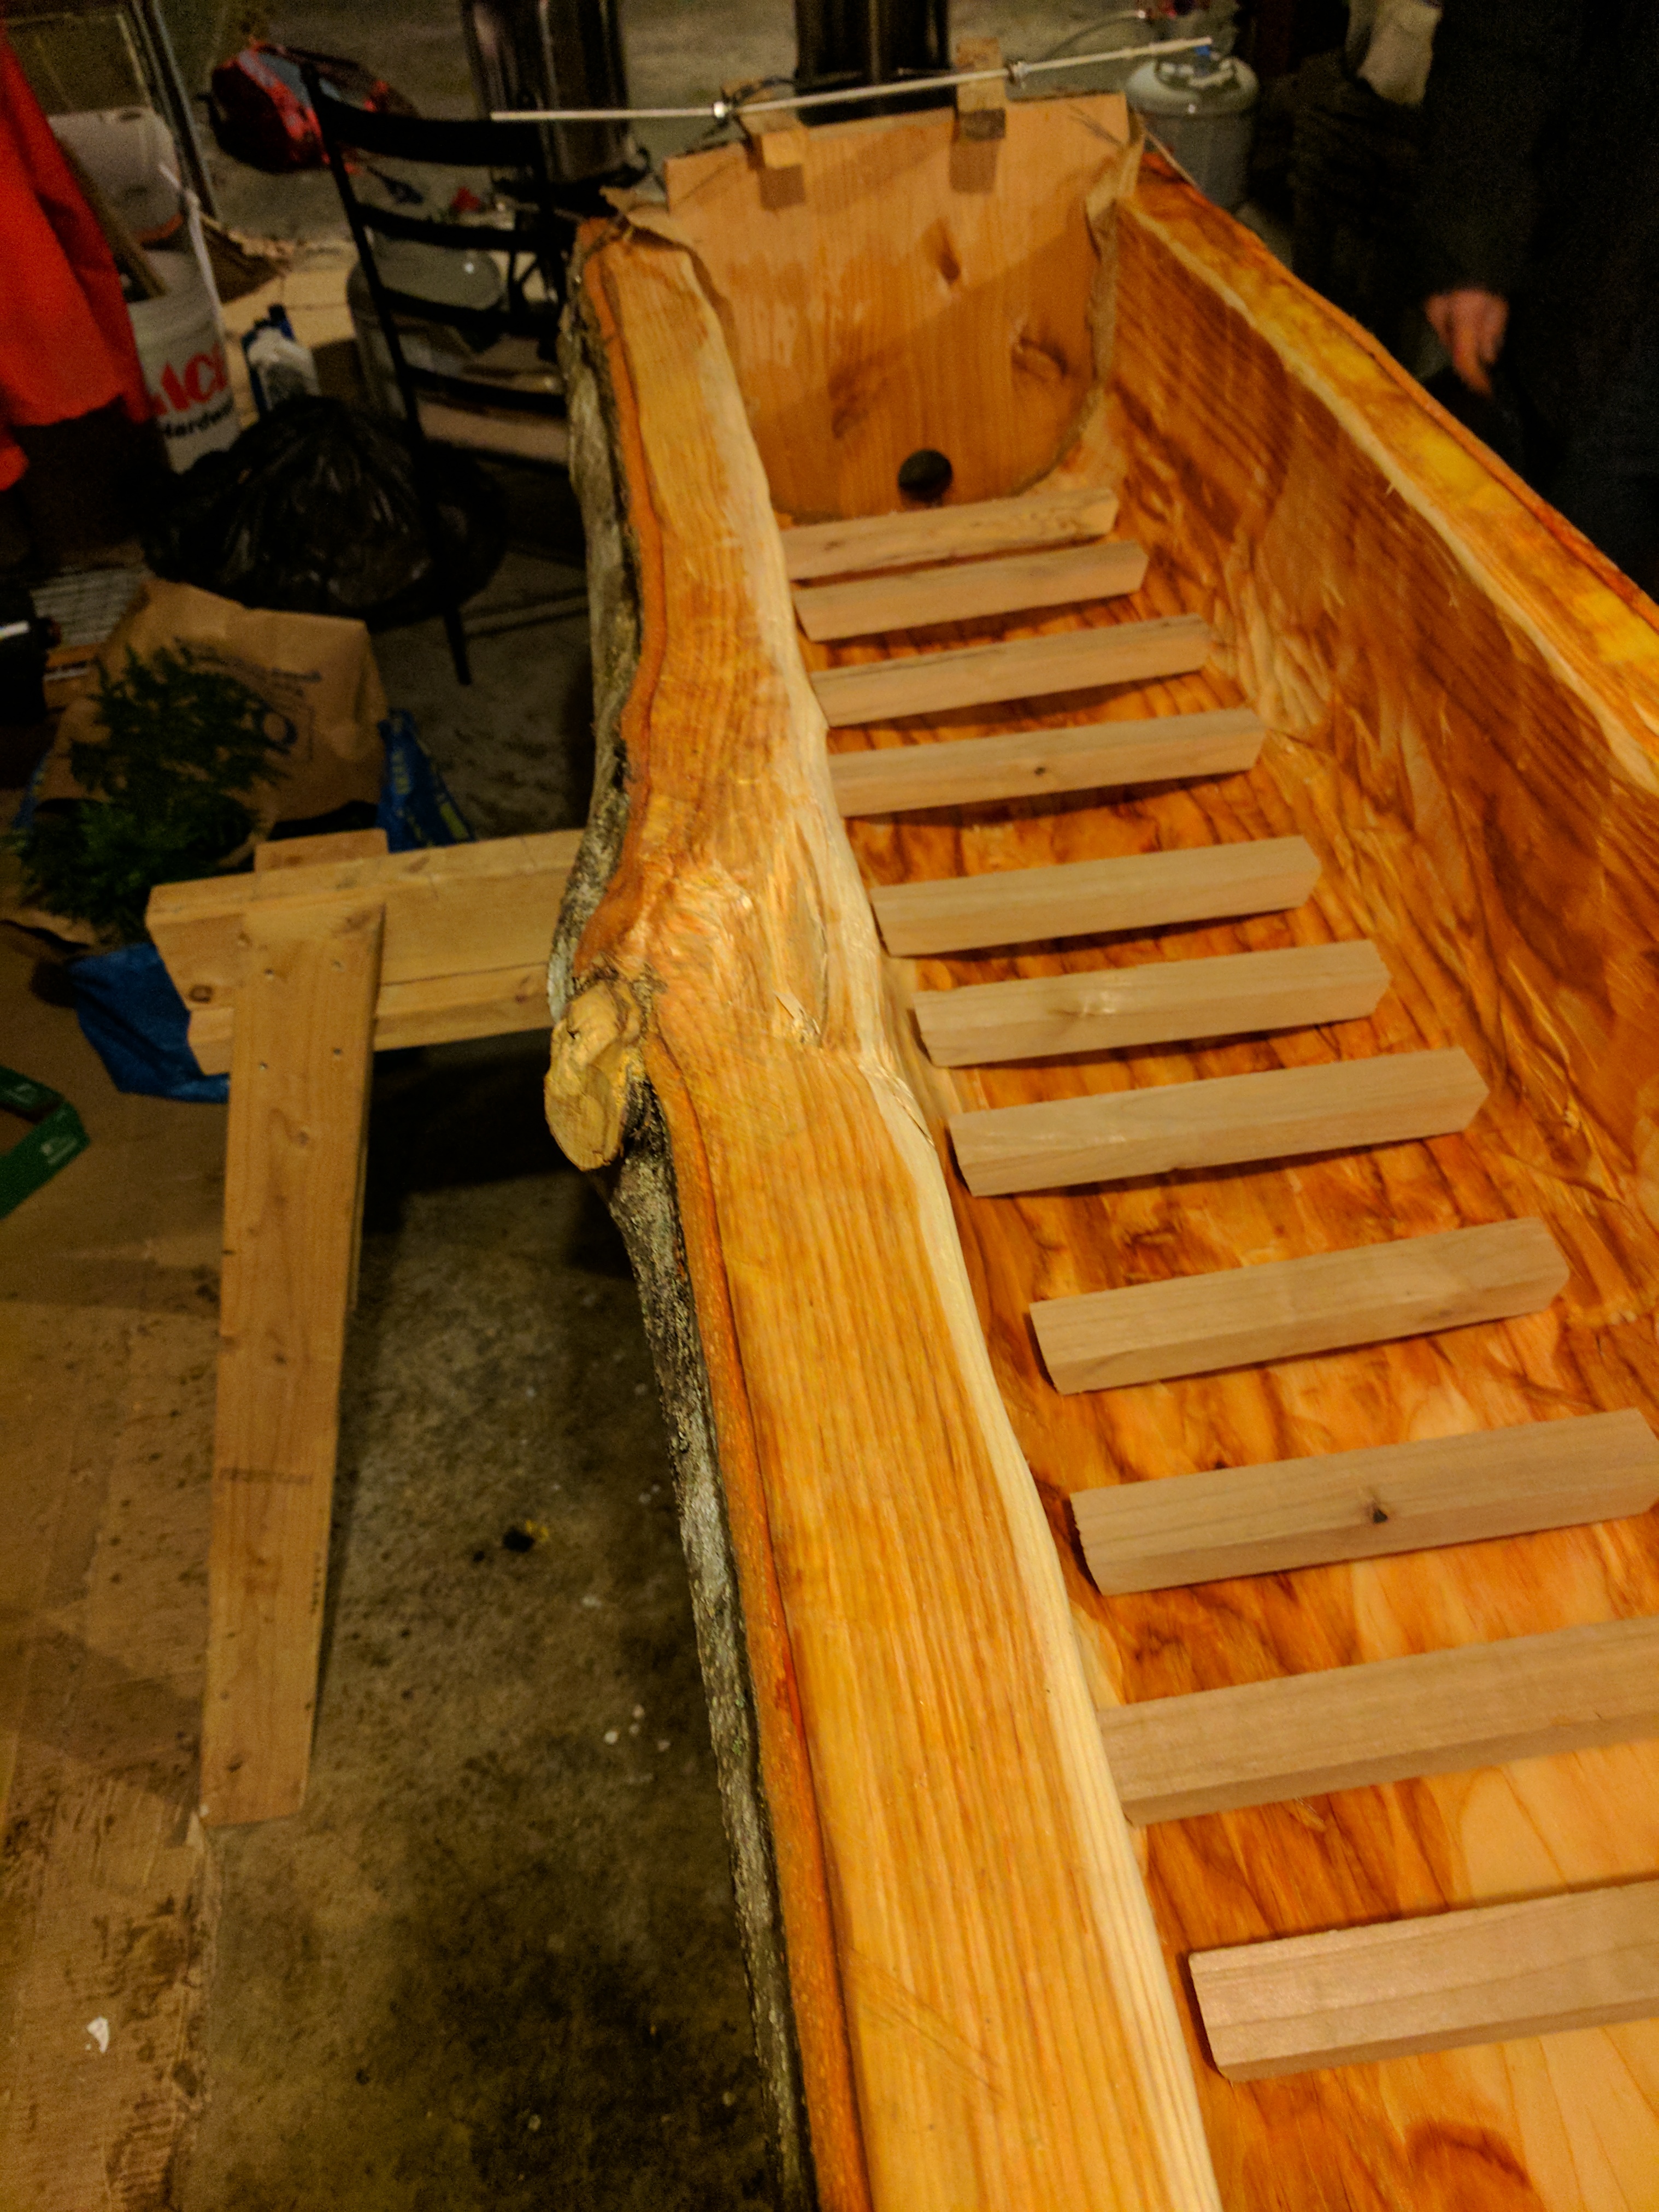 Slats to hold the juniper